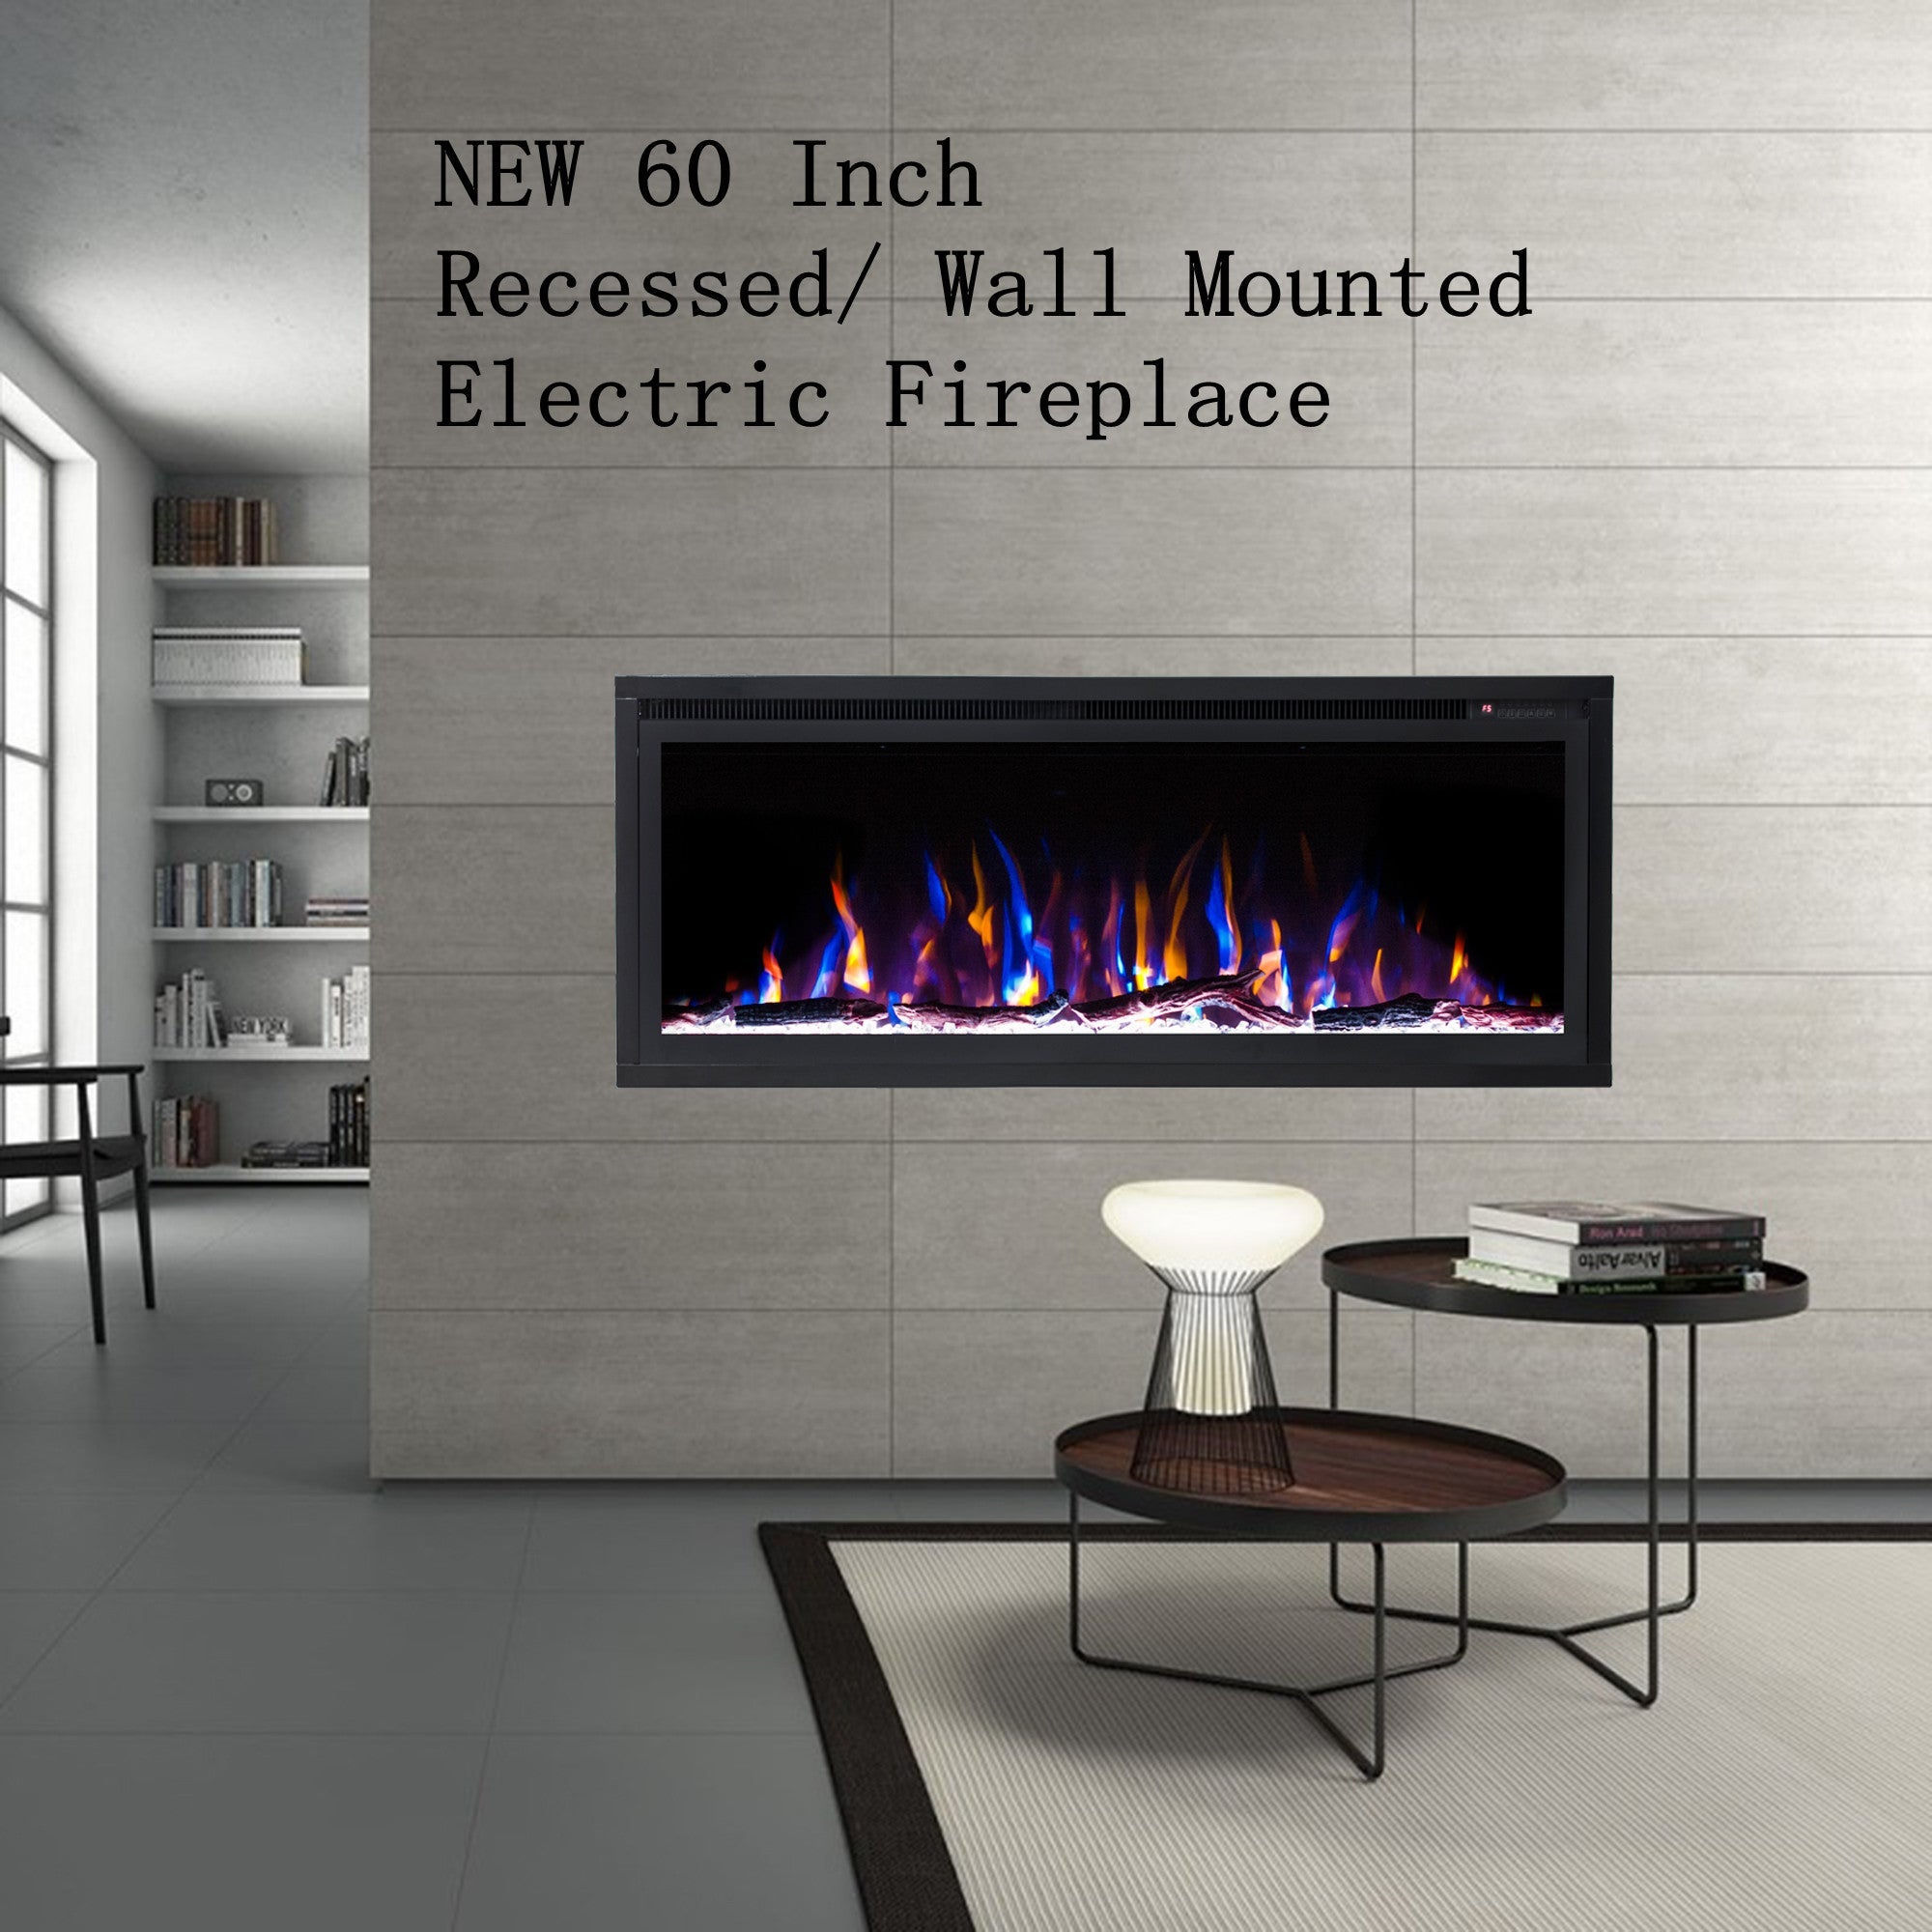 Furniture: Wall Mounted Electric Fireplace Heater Unique Slim Electric Fireplace Spurinteractive - Best Of Wall Mounted Electric Fireplace Heater | Golden Vantage Gv-510epb 35 Wall Mounted Electric Fireplace Heater, Northwest Fire & Ice Wall-mounted Electric Fireplace Heater With Remote, 36 Wall Mounted Electric Fireplace Heater Backlight With Pebbles S-510dpb - www.autumnpiper.com